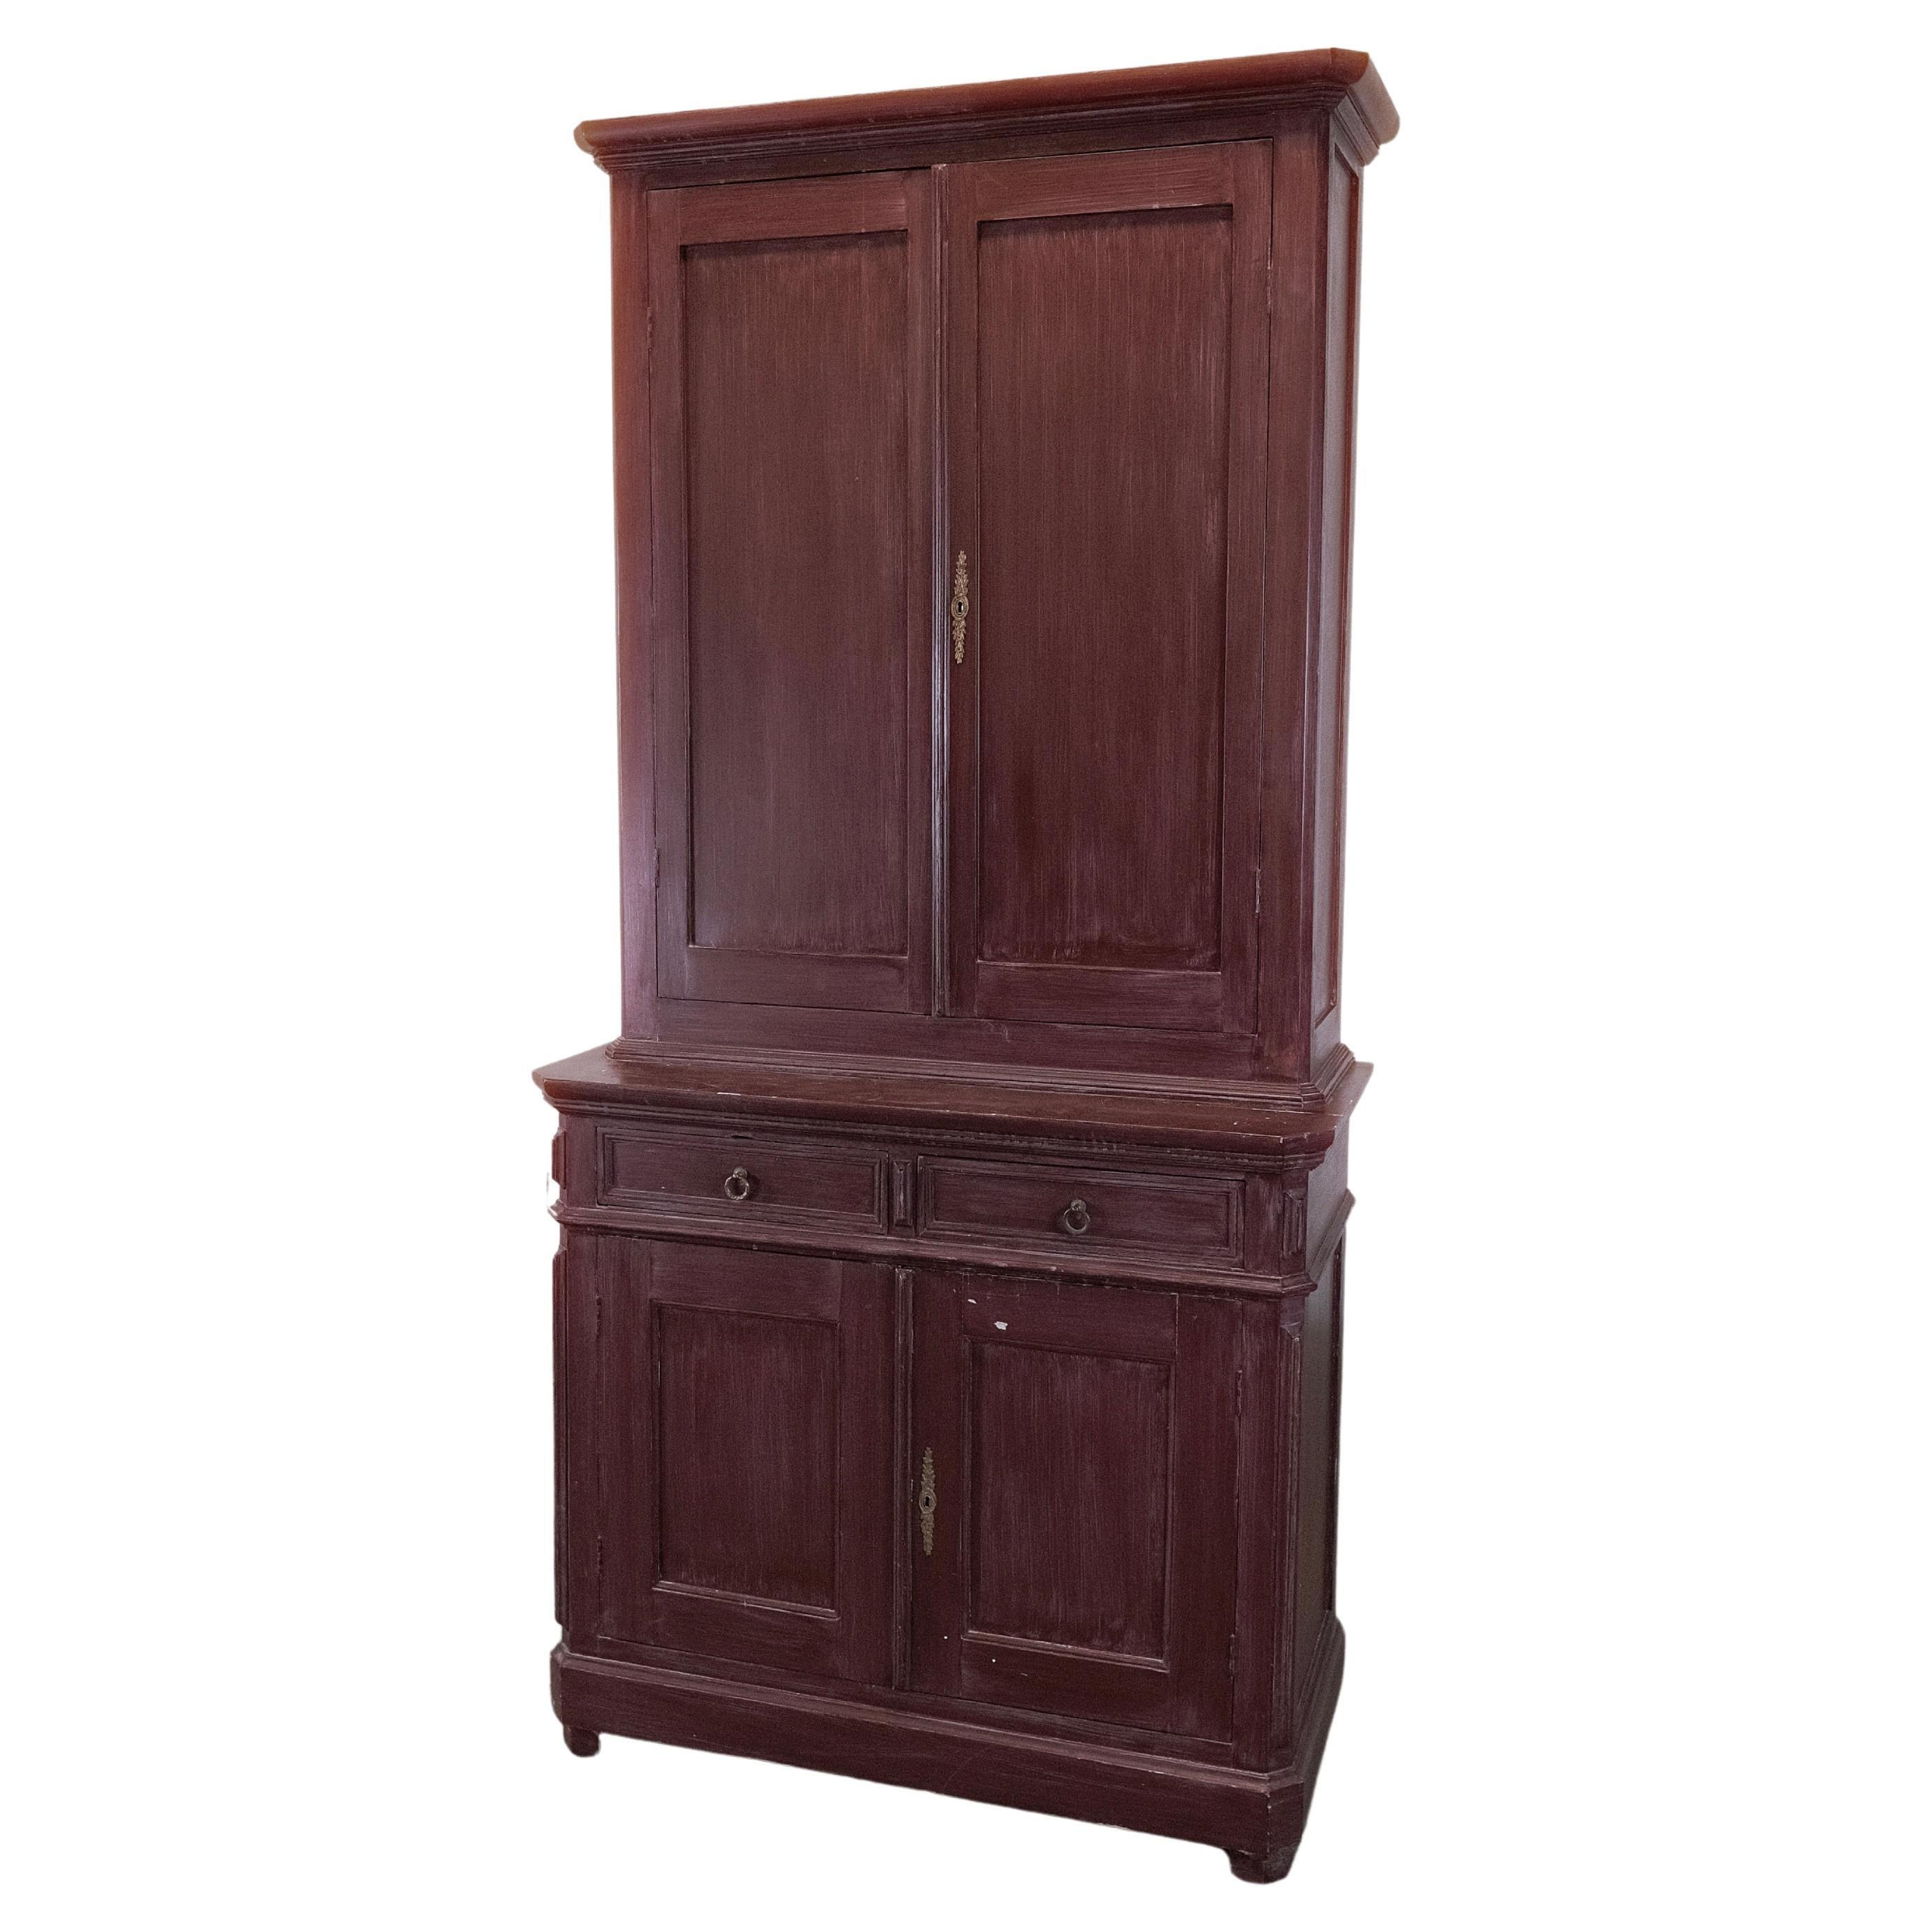 Step into a world of vintage charm with this antique two-piece pine cupboard, a piece that beautifully marries functionality with whimsical elegance. Its exterior, crafted from aged pine, carries the character of time, while a delightful surprise